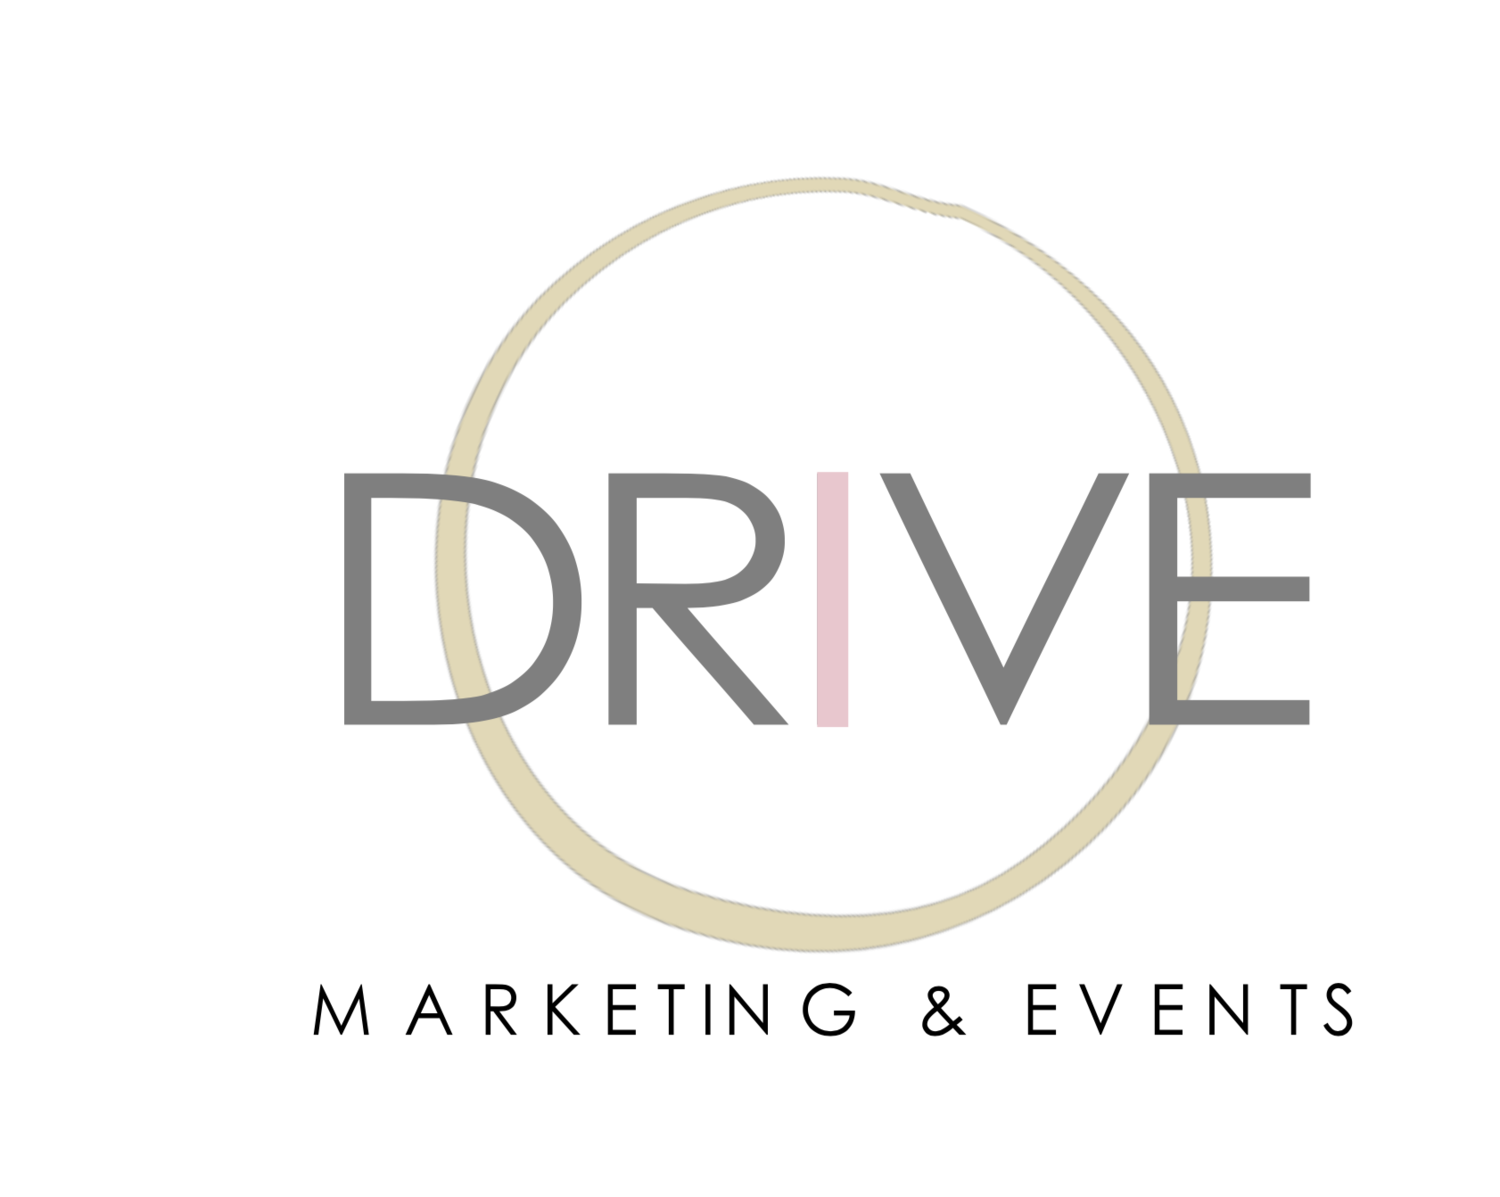 Drive is an all-encompassing marketing and events agency